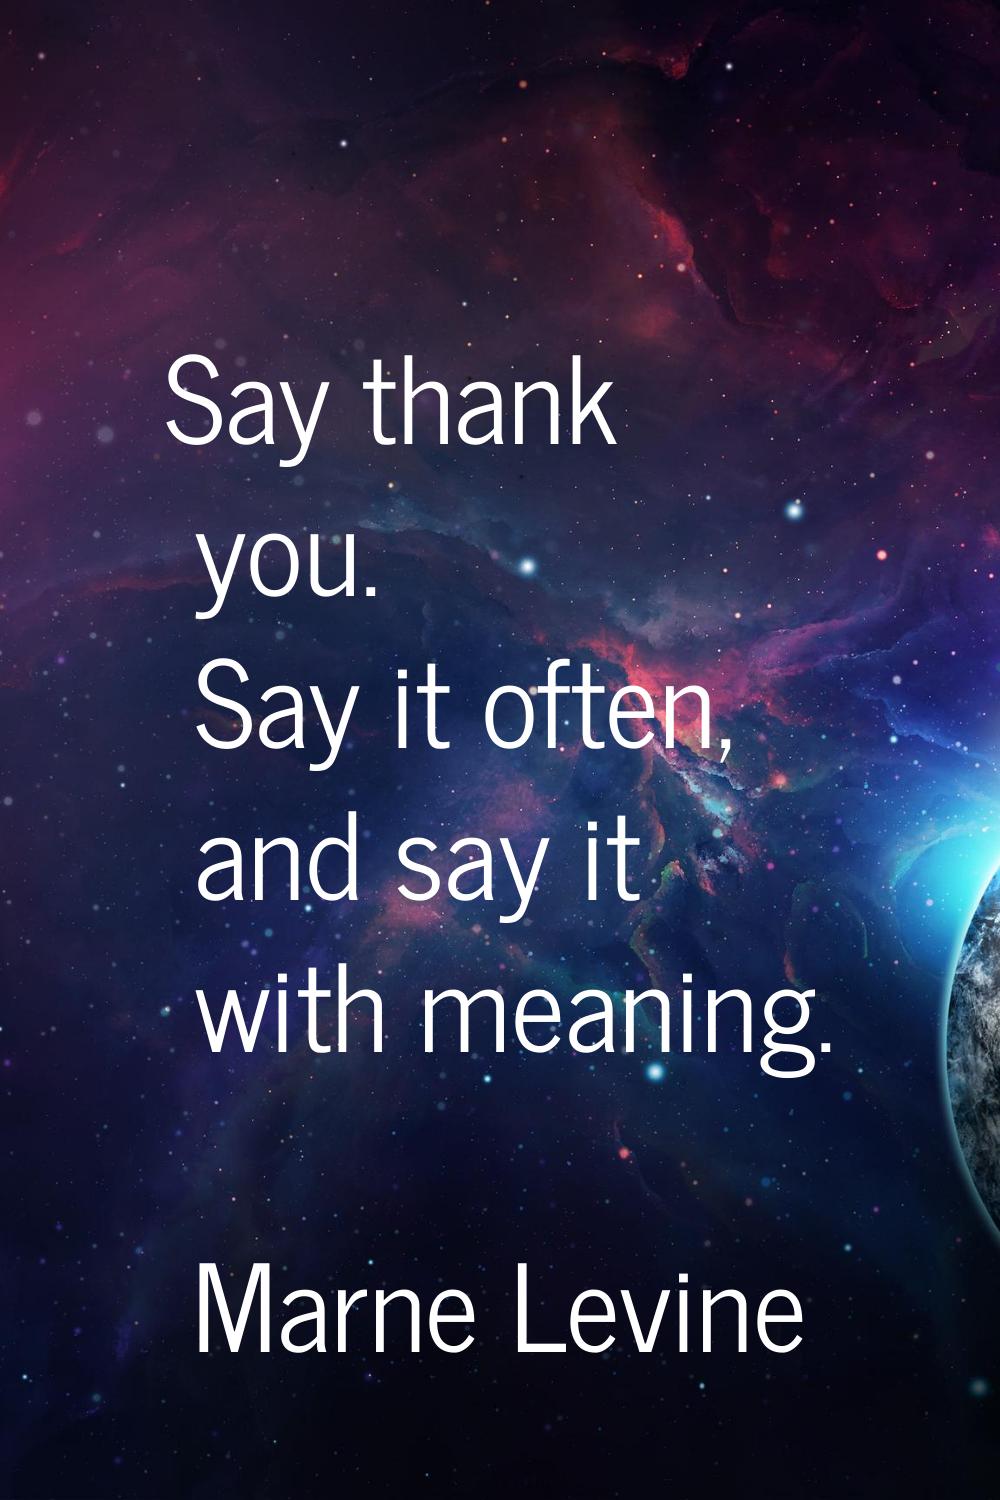 Say thank you. Say it often, and say it with meaning.